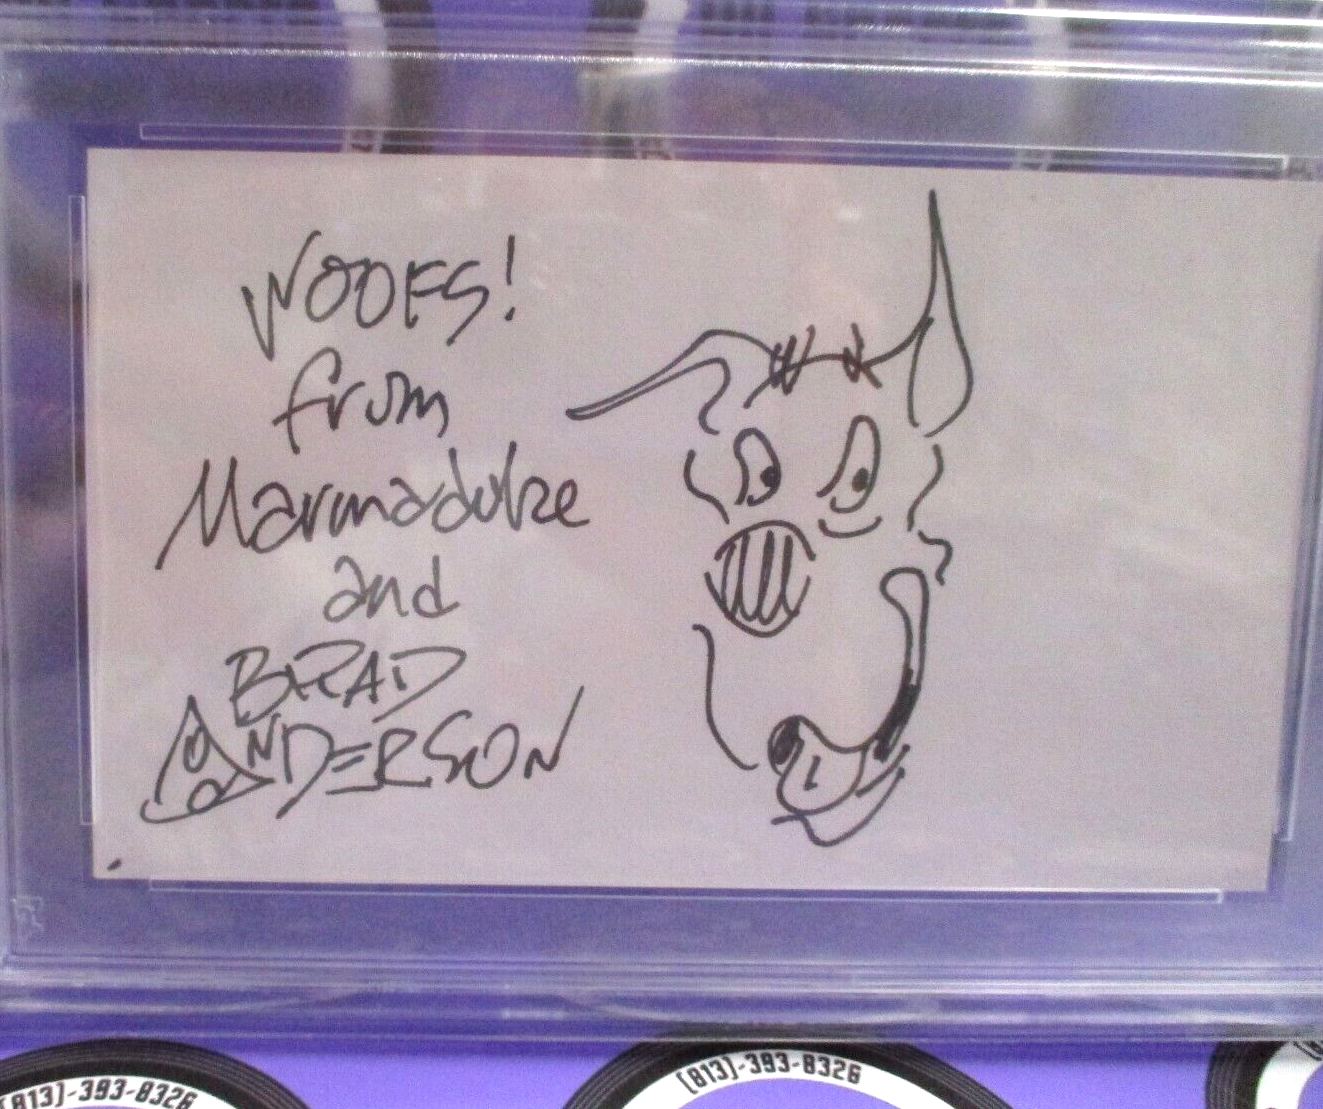 Brad Anderson Autographed Index Card Signed PSA Certified #84688669 Marmaduke